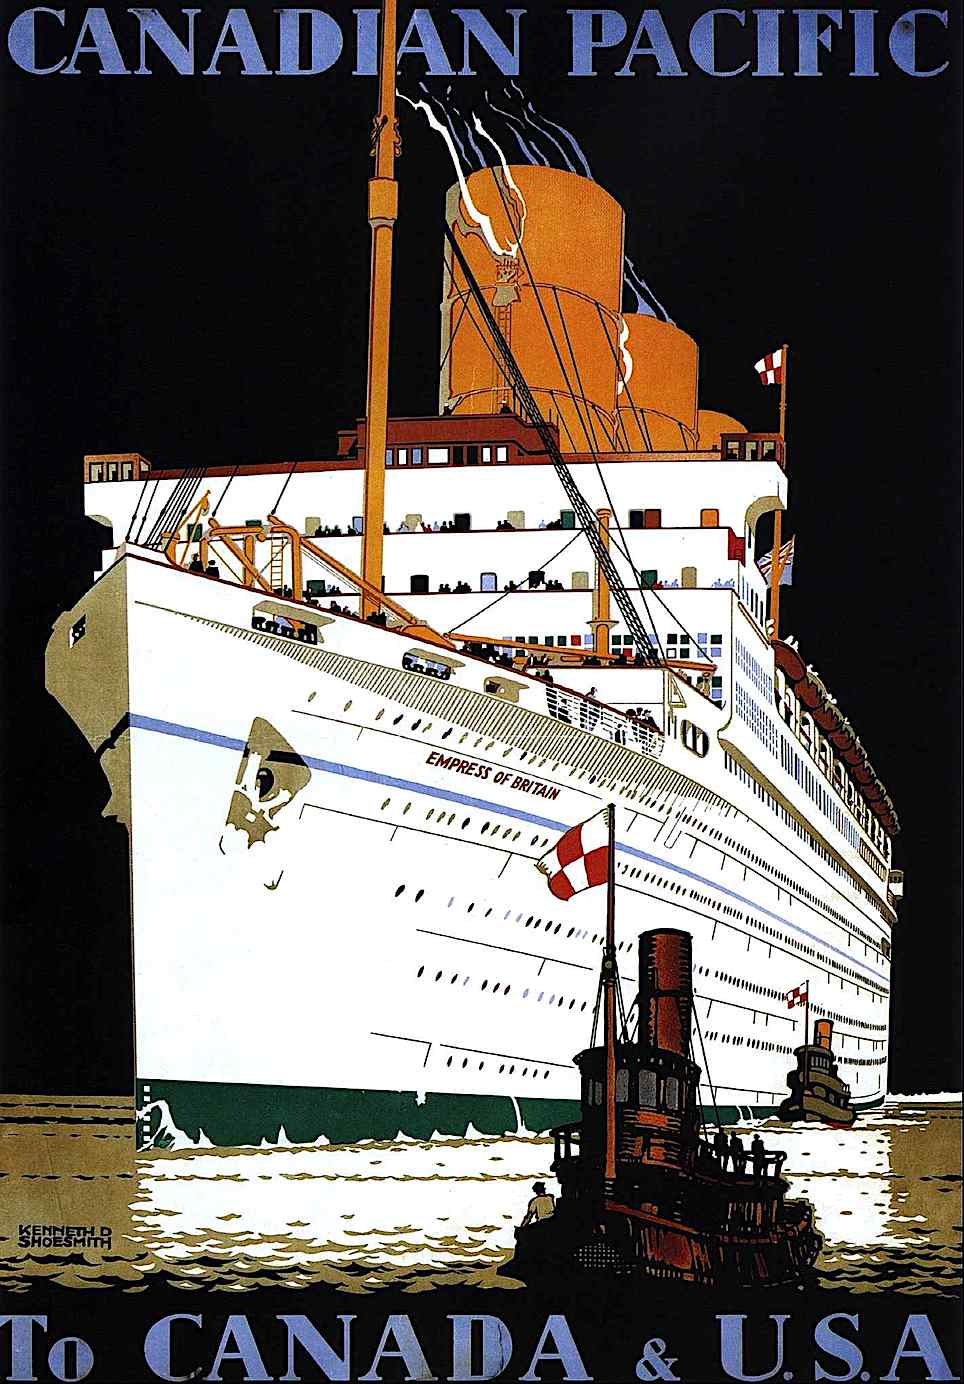 a Kenneth Shoesmith 1933 travel poster illustration for Canadian the Pacifics line, a giant ship with tugboat